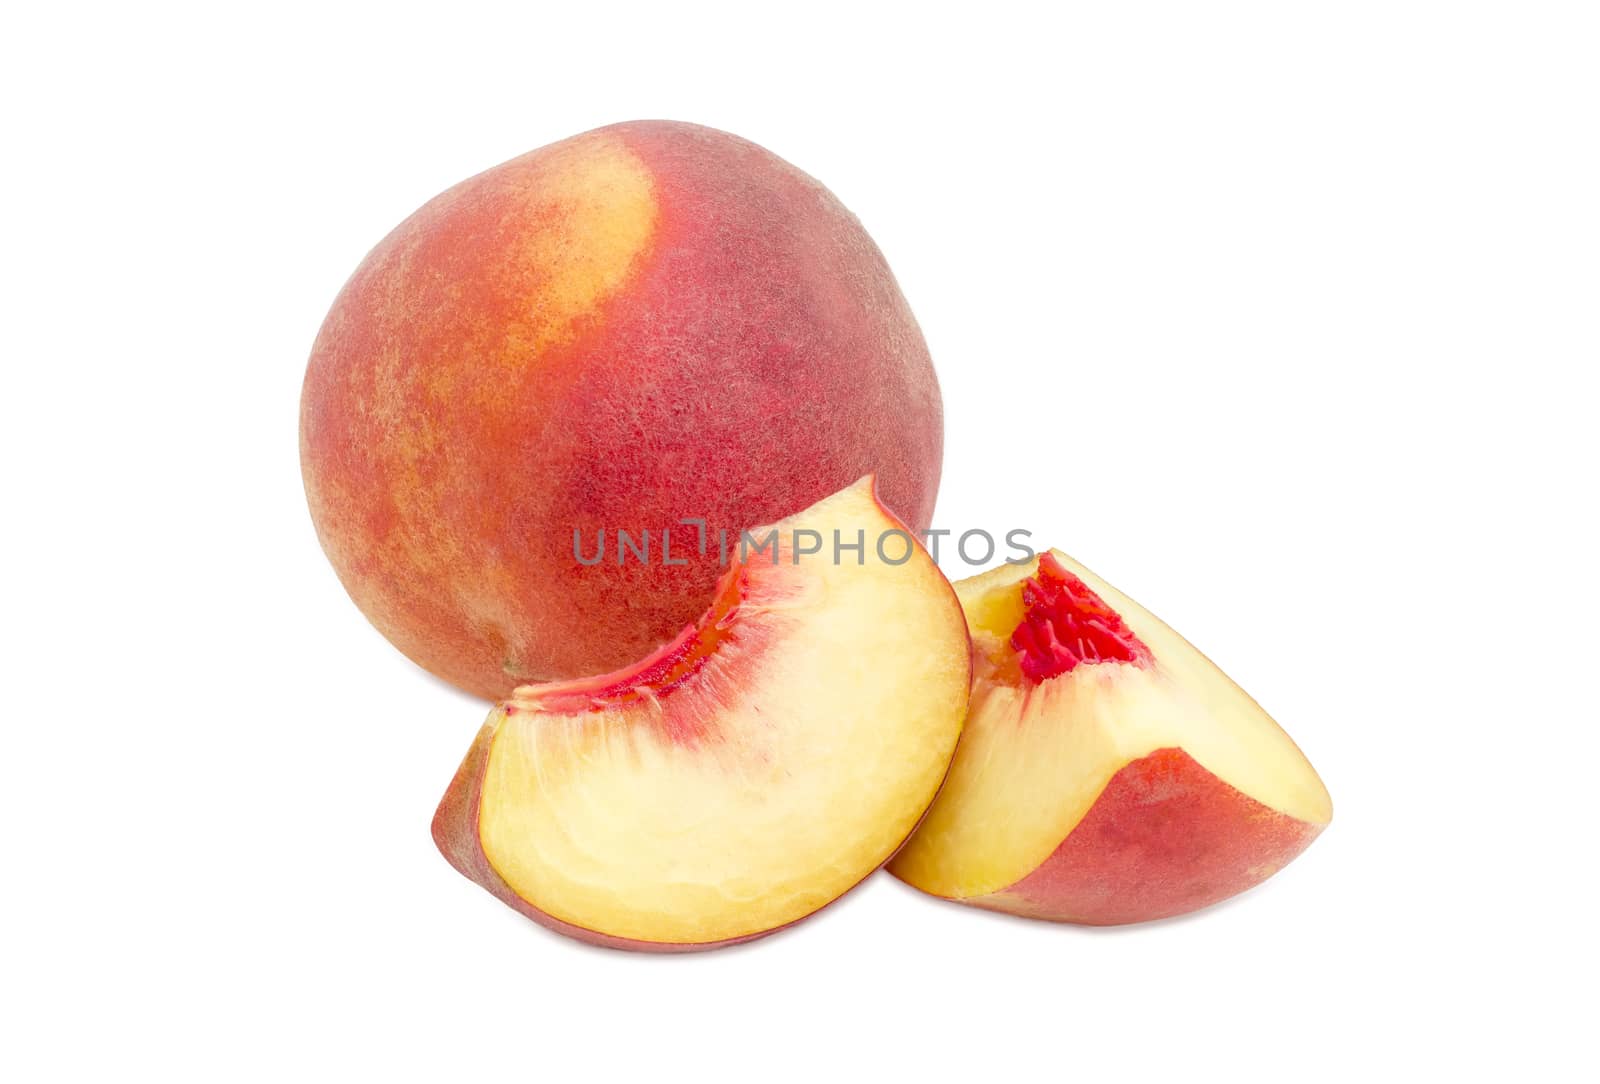 One whole ripe fresh peach and two peach slices on a white background
